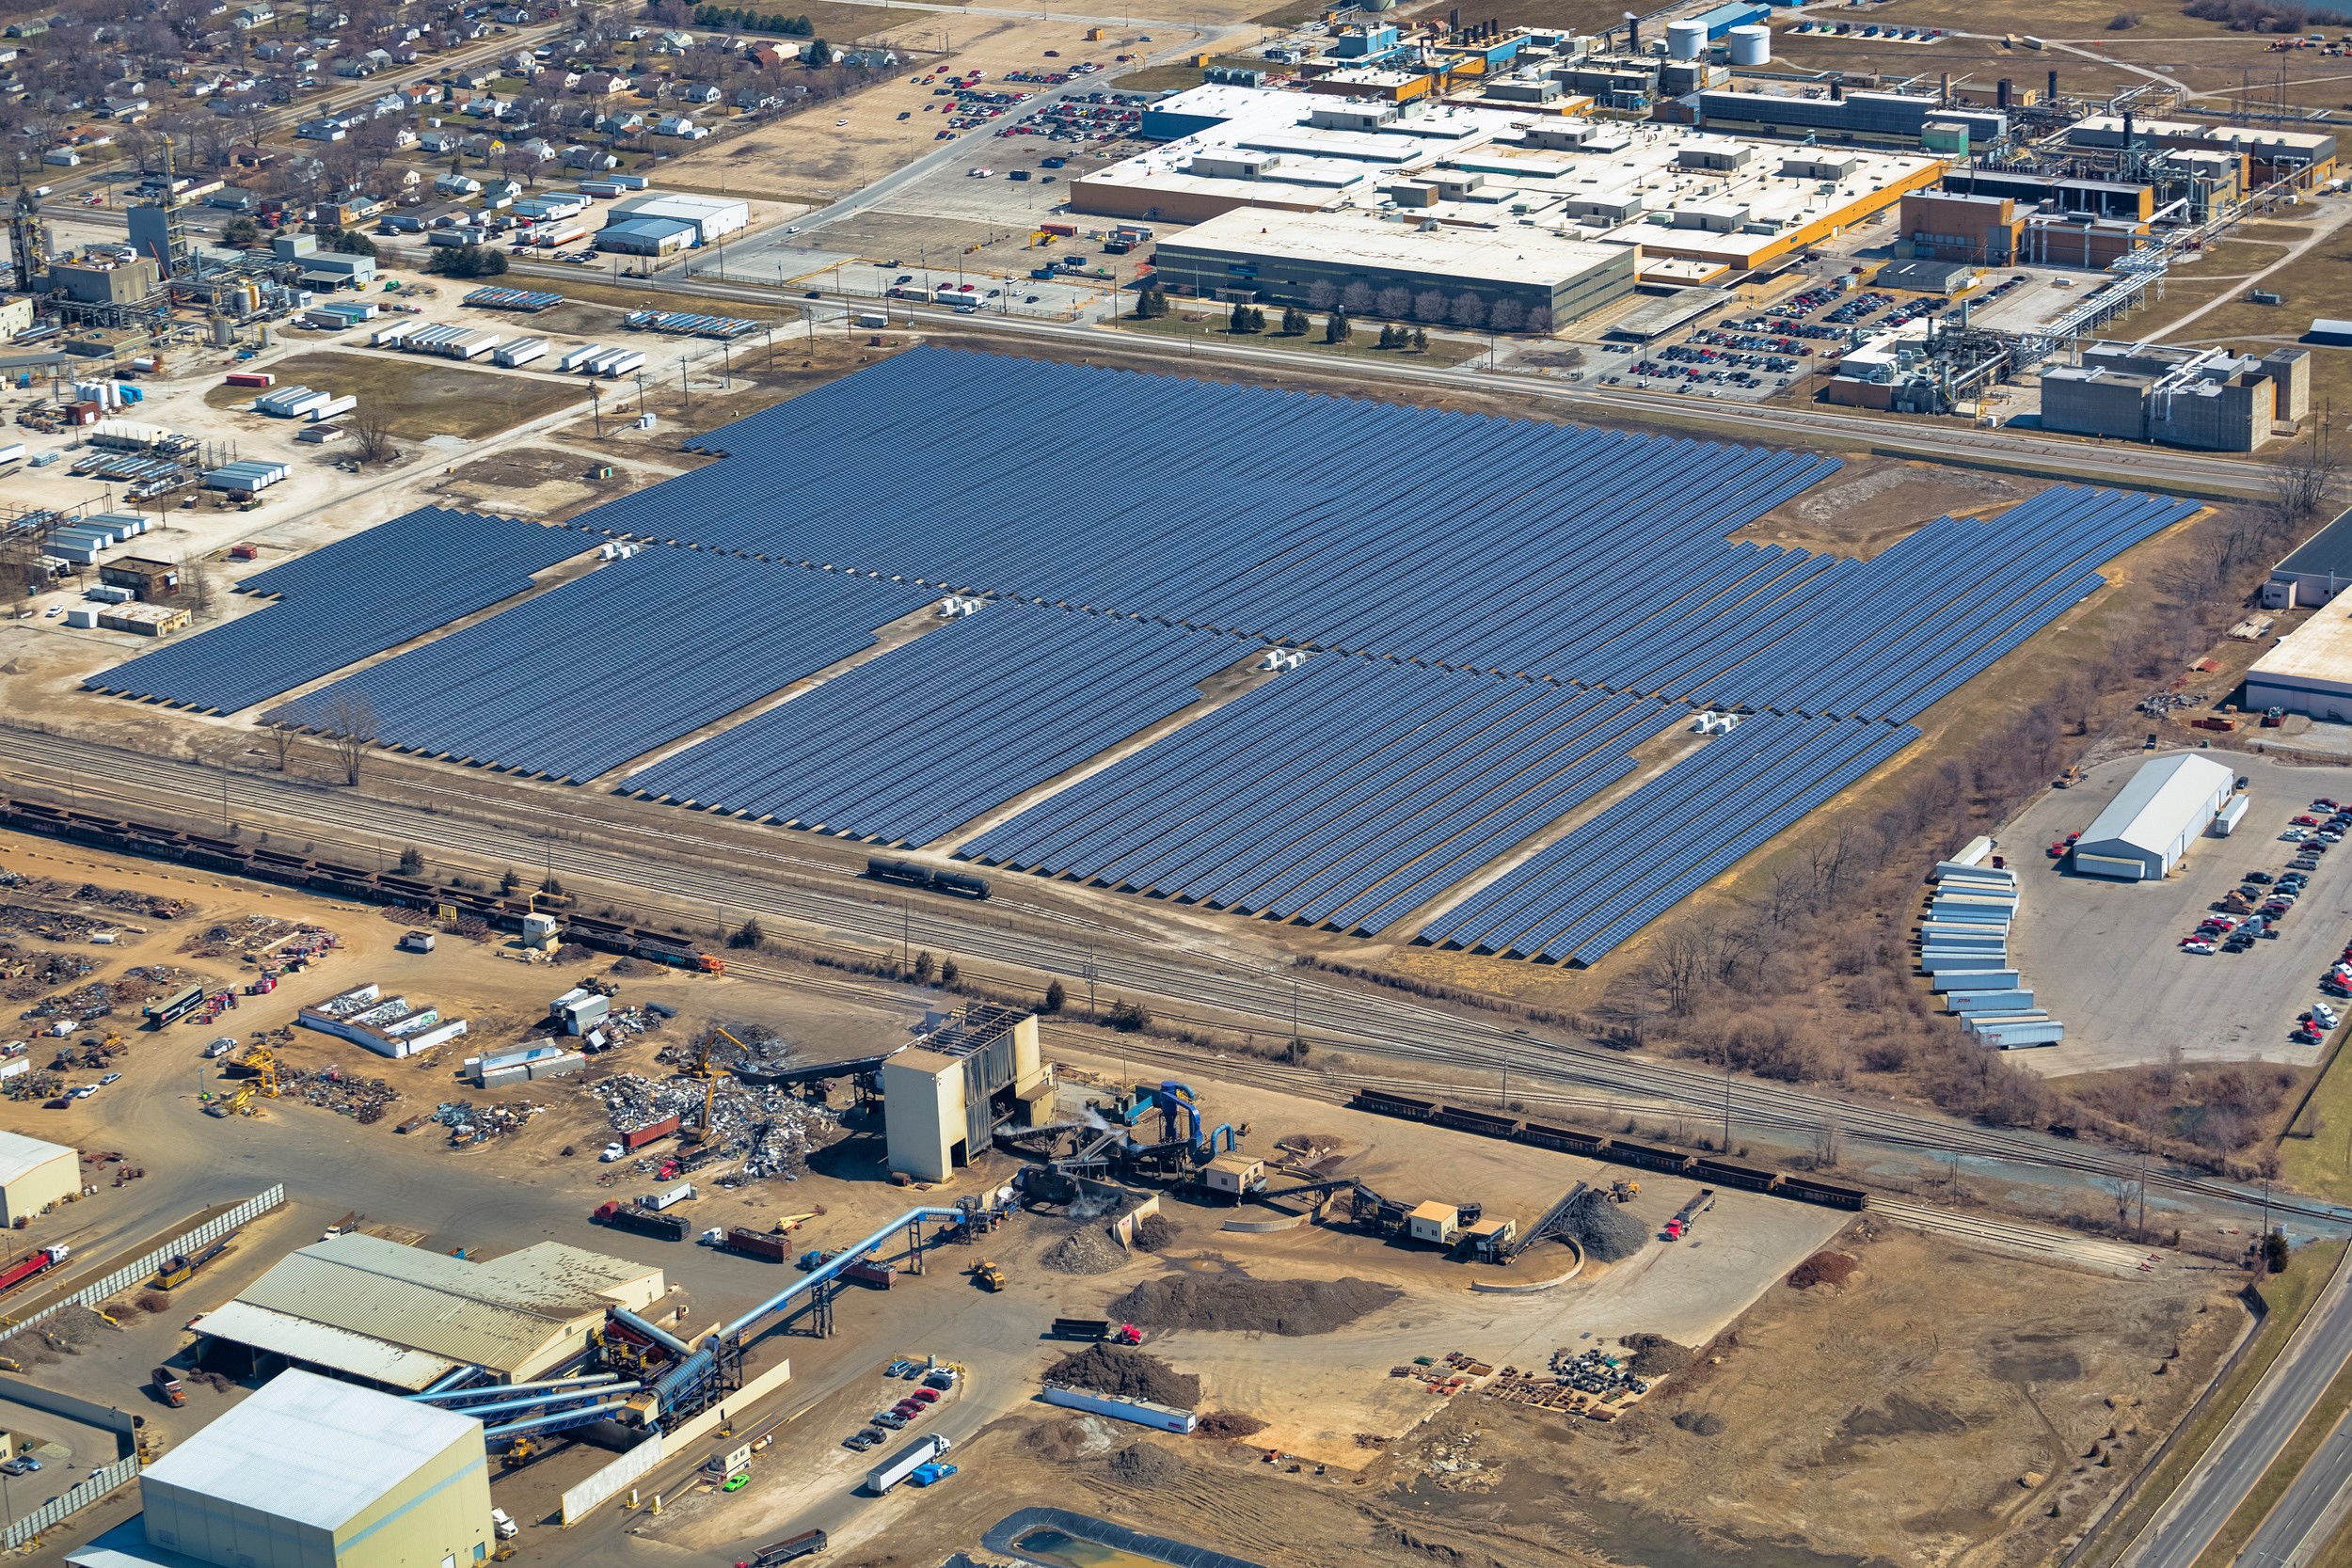 Aerial shot of solar farm built on the former Reilly Tar and Chemical Superfund site